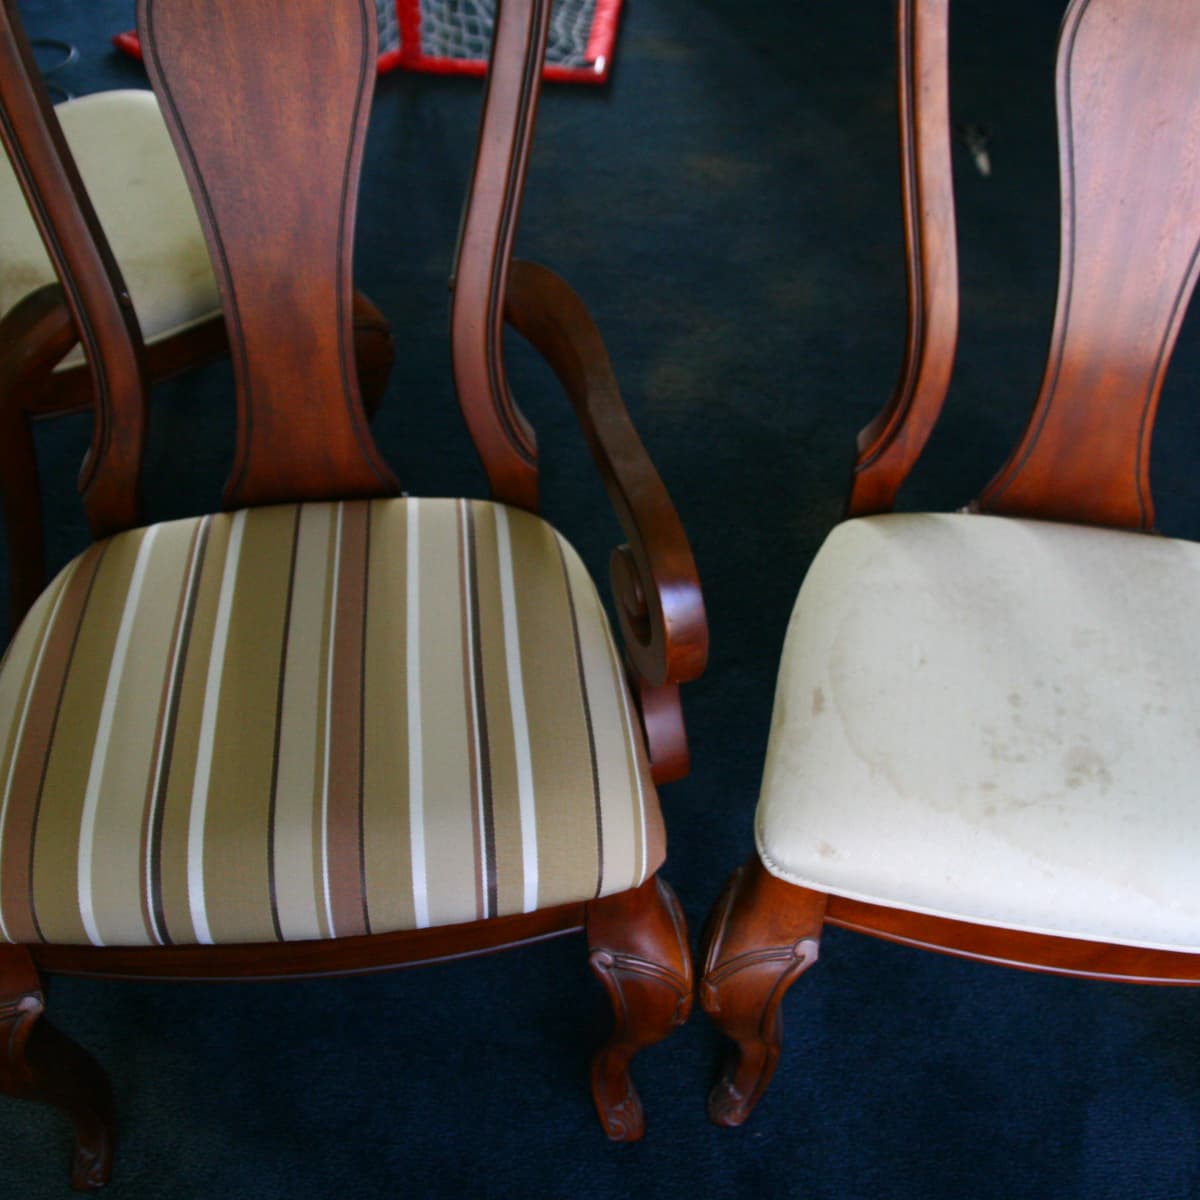 How To Reupholster A Dining Room Chair, Fabric Ideas For Reupholstering Dining Room Chairs